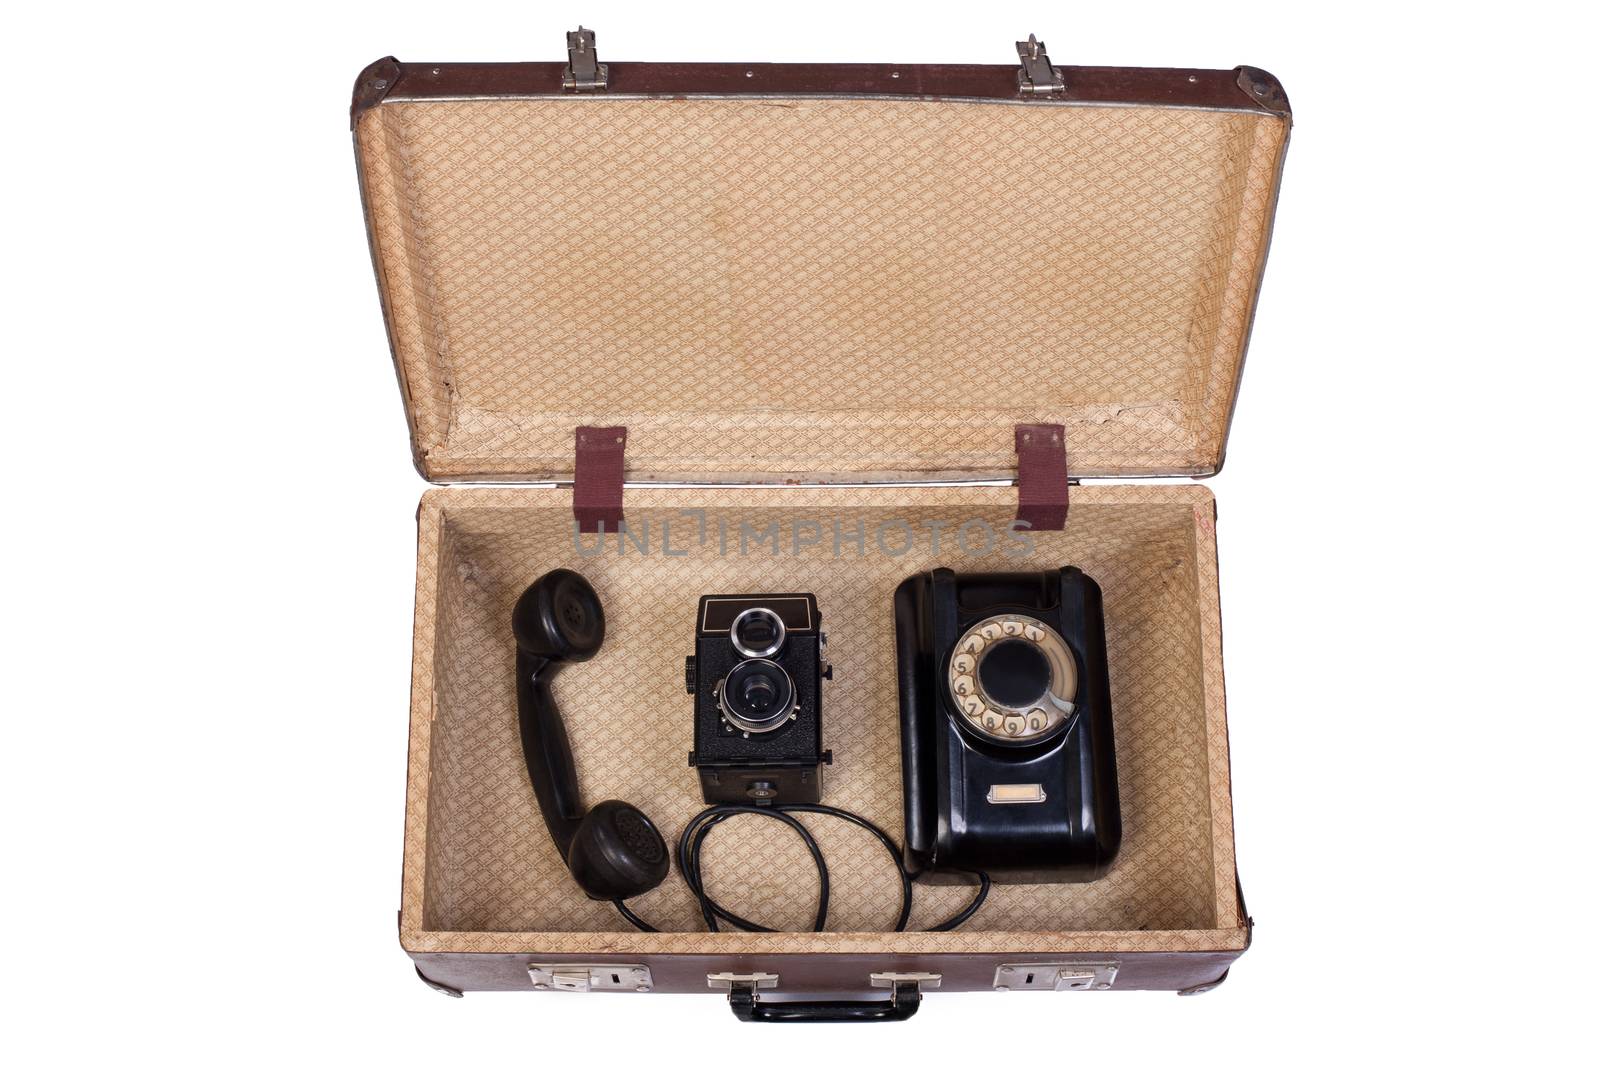 rotational phone and  film camera in an old suitcase by yurii_bizgaimer